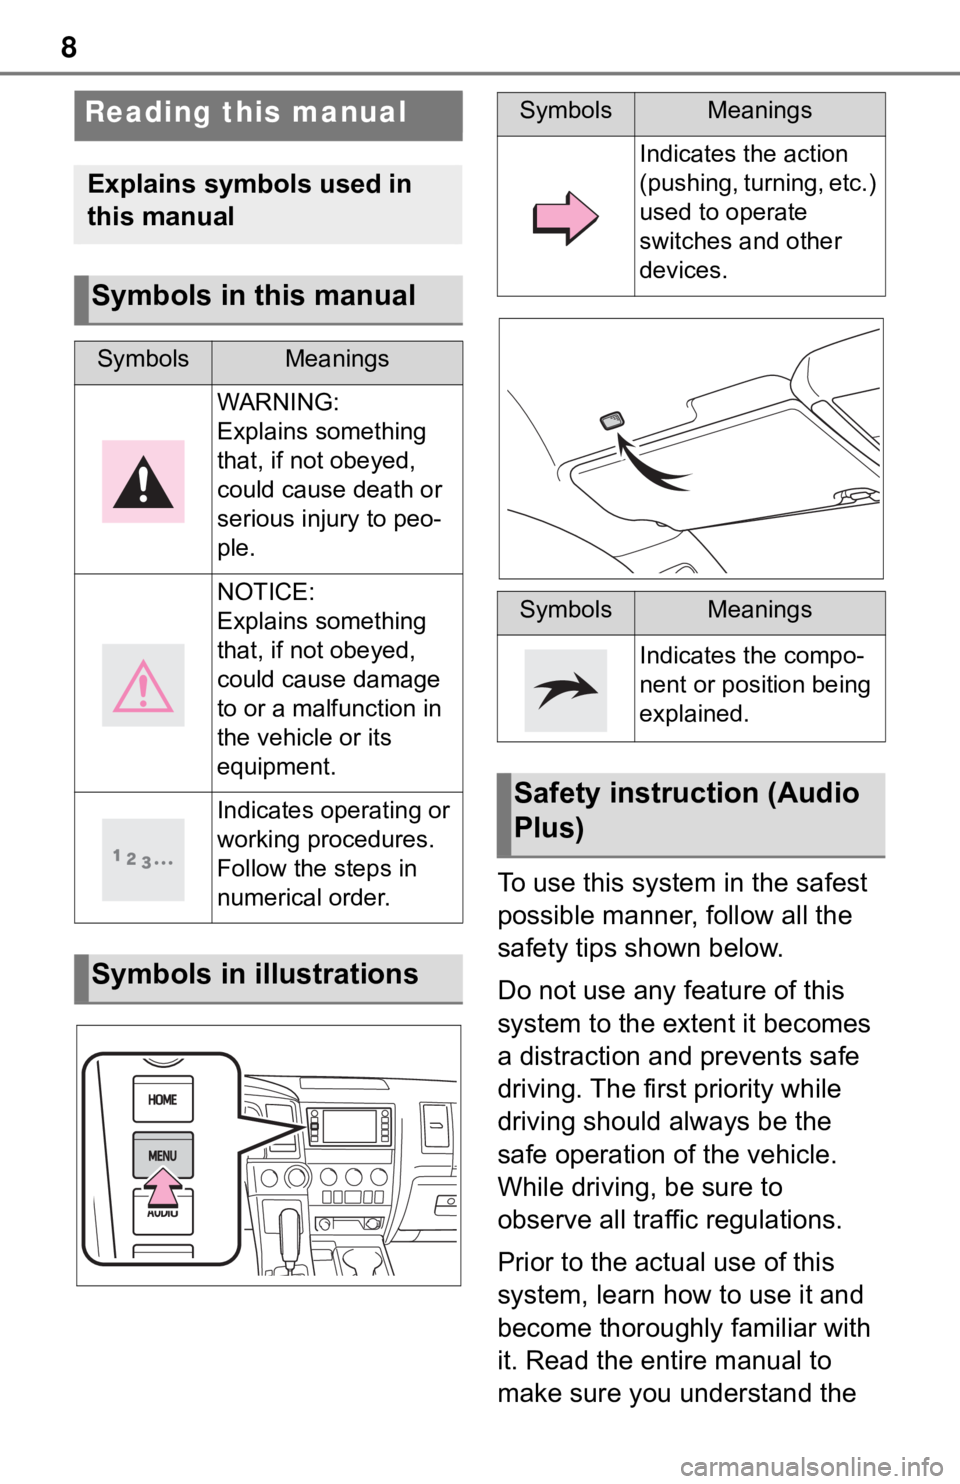 TOYOTA SEQUOIA 2020  Accessories, Audio & Navigation (in English) 8
To use this system in the safest 
possible manner, follow all the 
safety tips shown below.
Do not use any feature of this 
system to the extent it becomes 
a distraction and prevents safe 
driving.